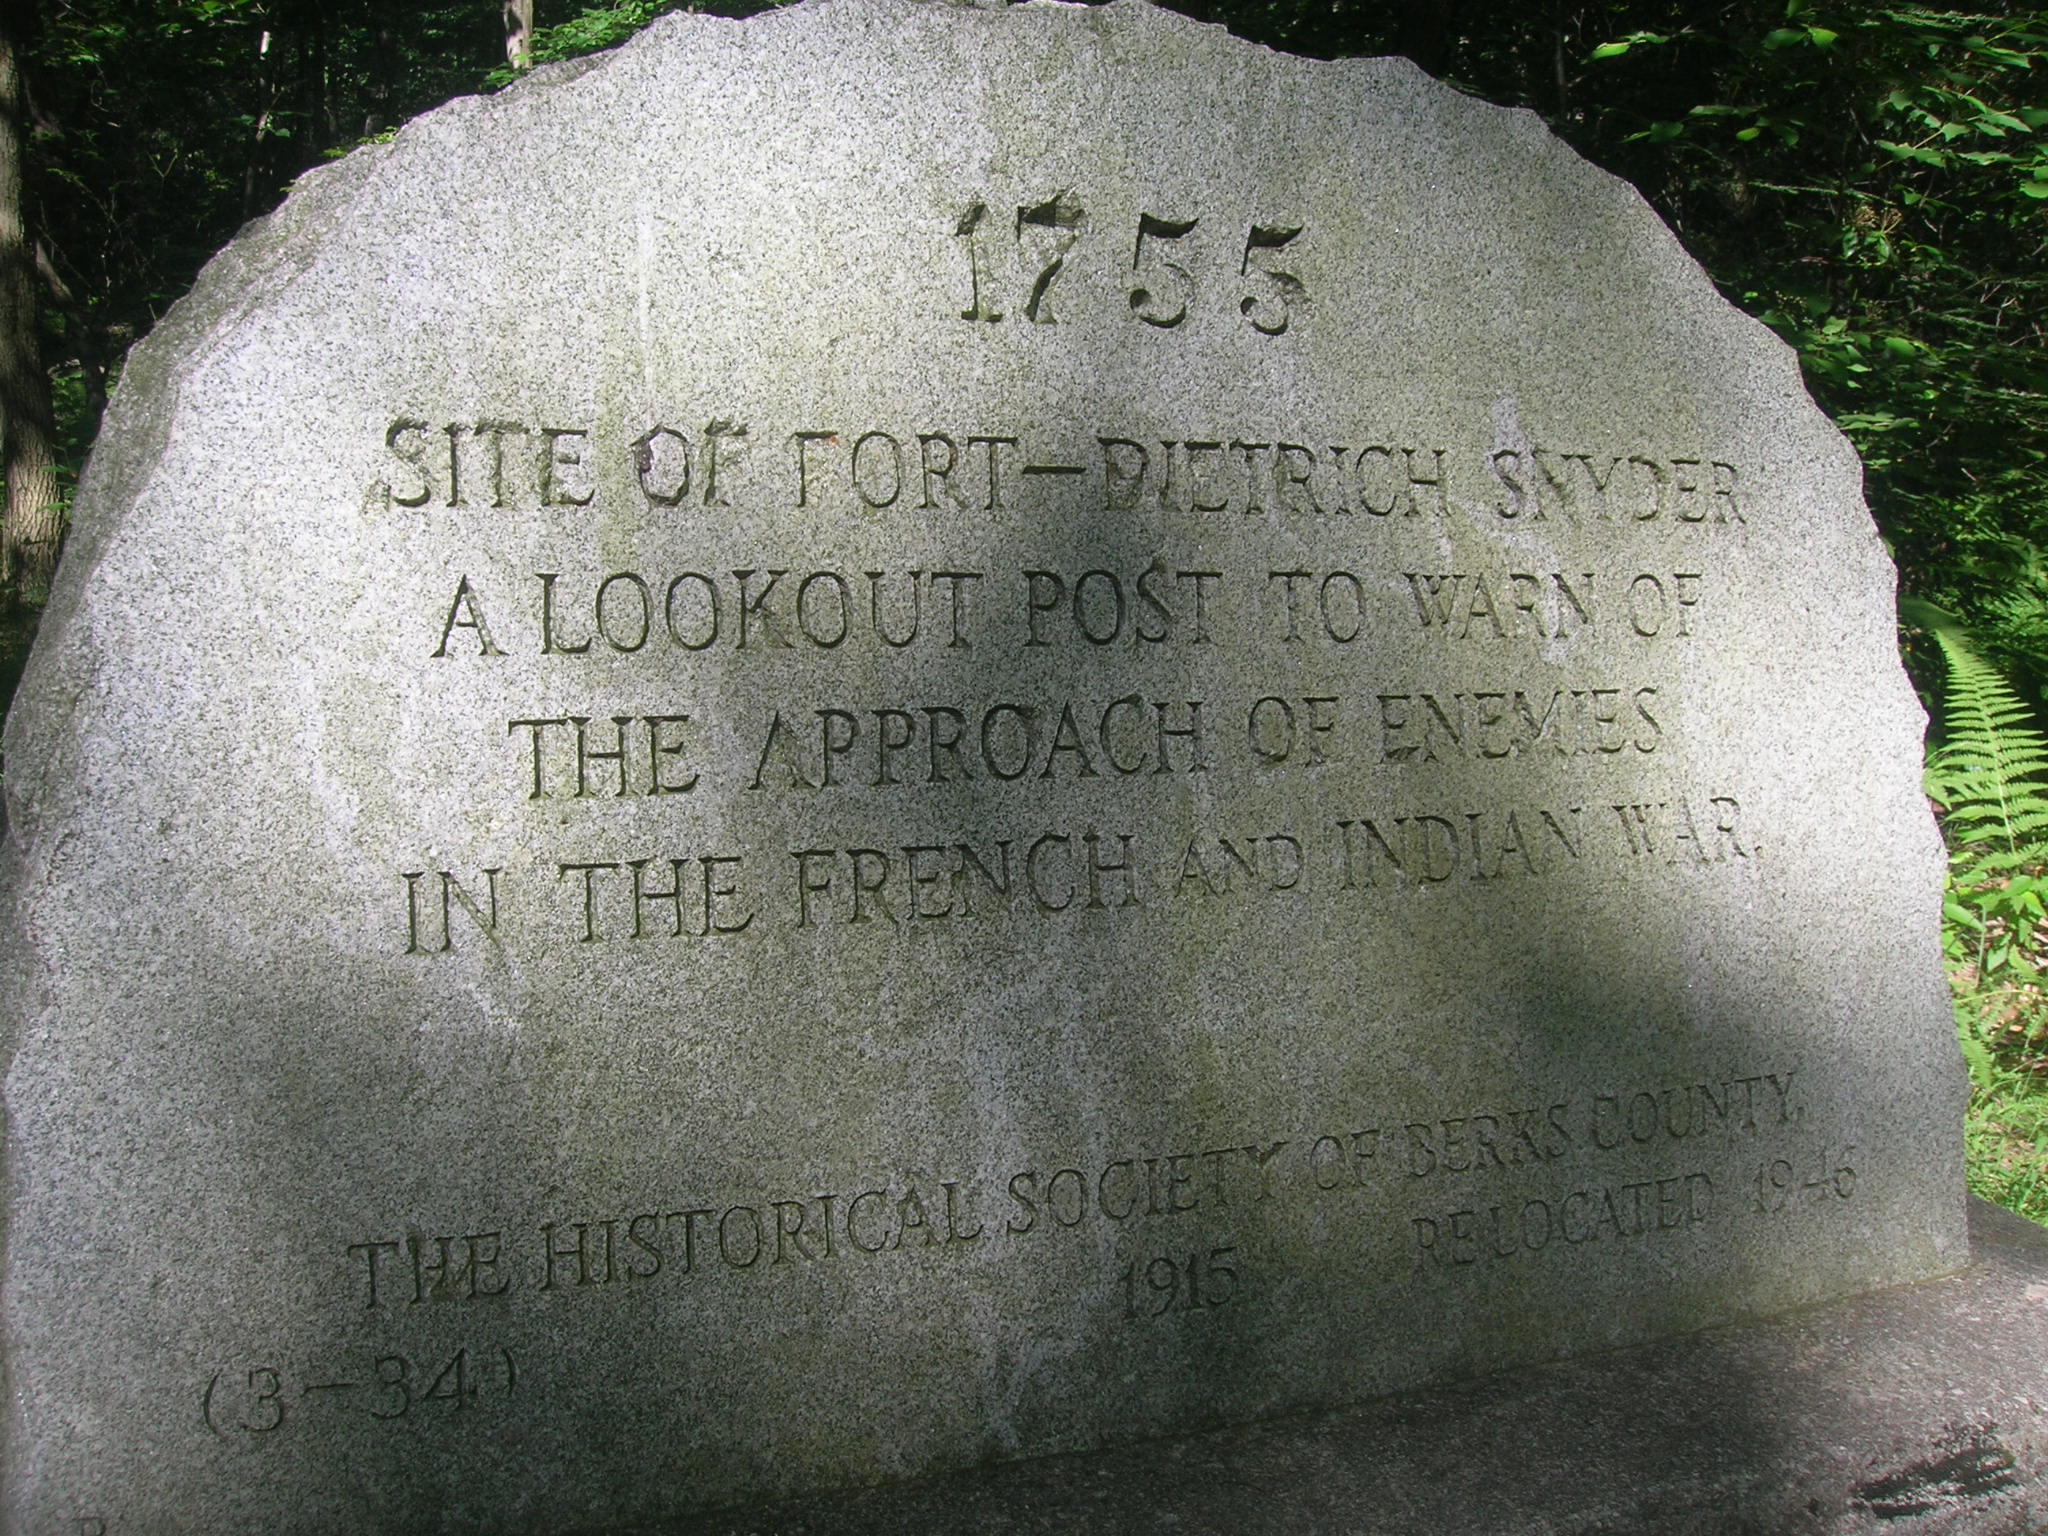 Stone marker with text "1755 - site of Fort-Dietrich Snyder. A lookout post to warn of the approach of enemies in the French and Indian War"